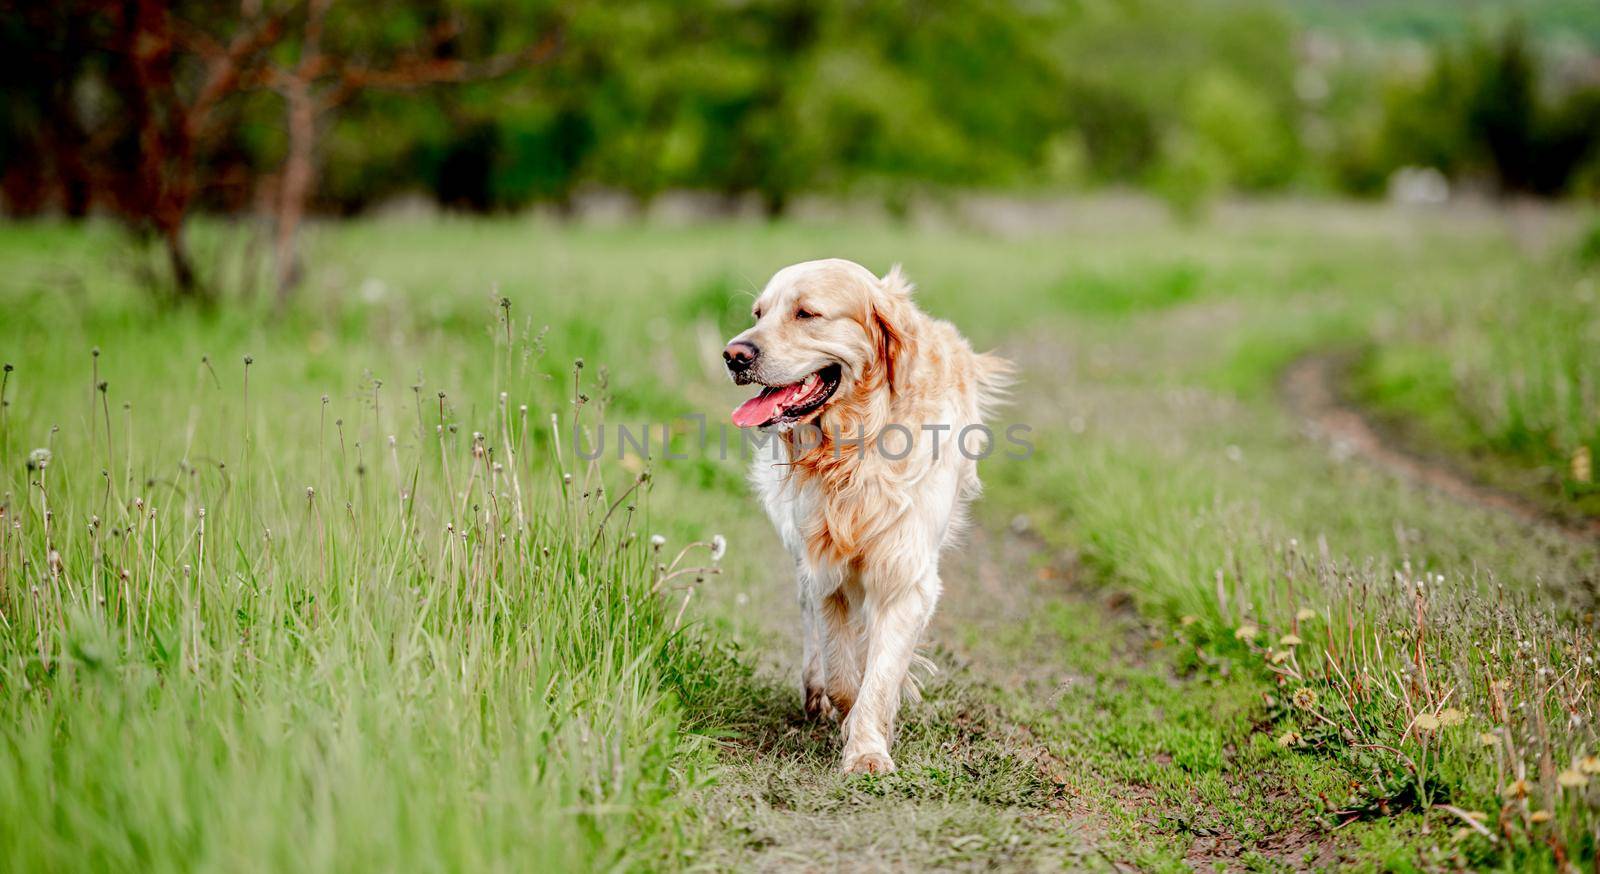 Old adorable golden retriever dog walking at the nature with tonque out feeling thirst in hot sunny day. Portrait of doggy pet labrador in summer park with green grass